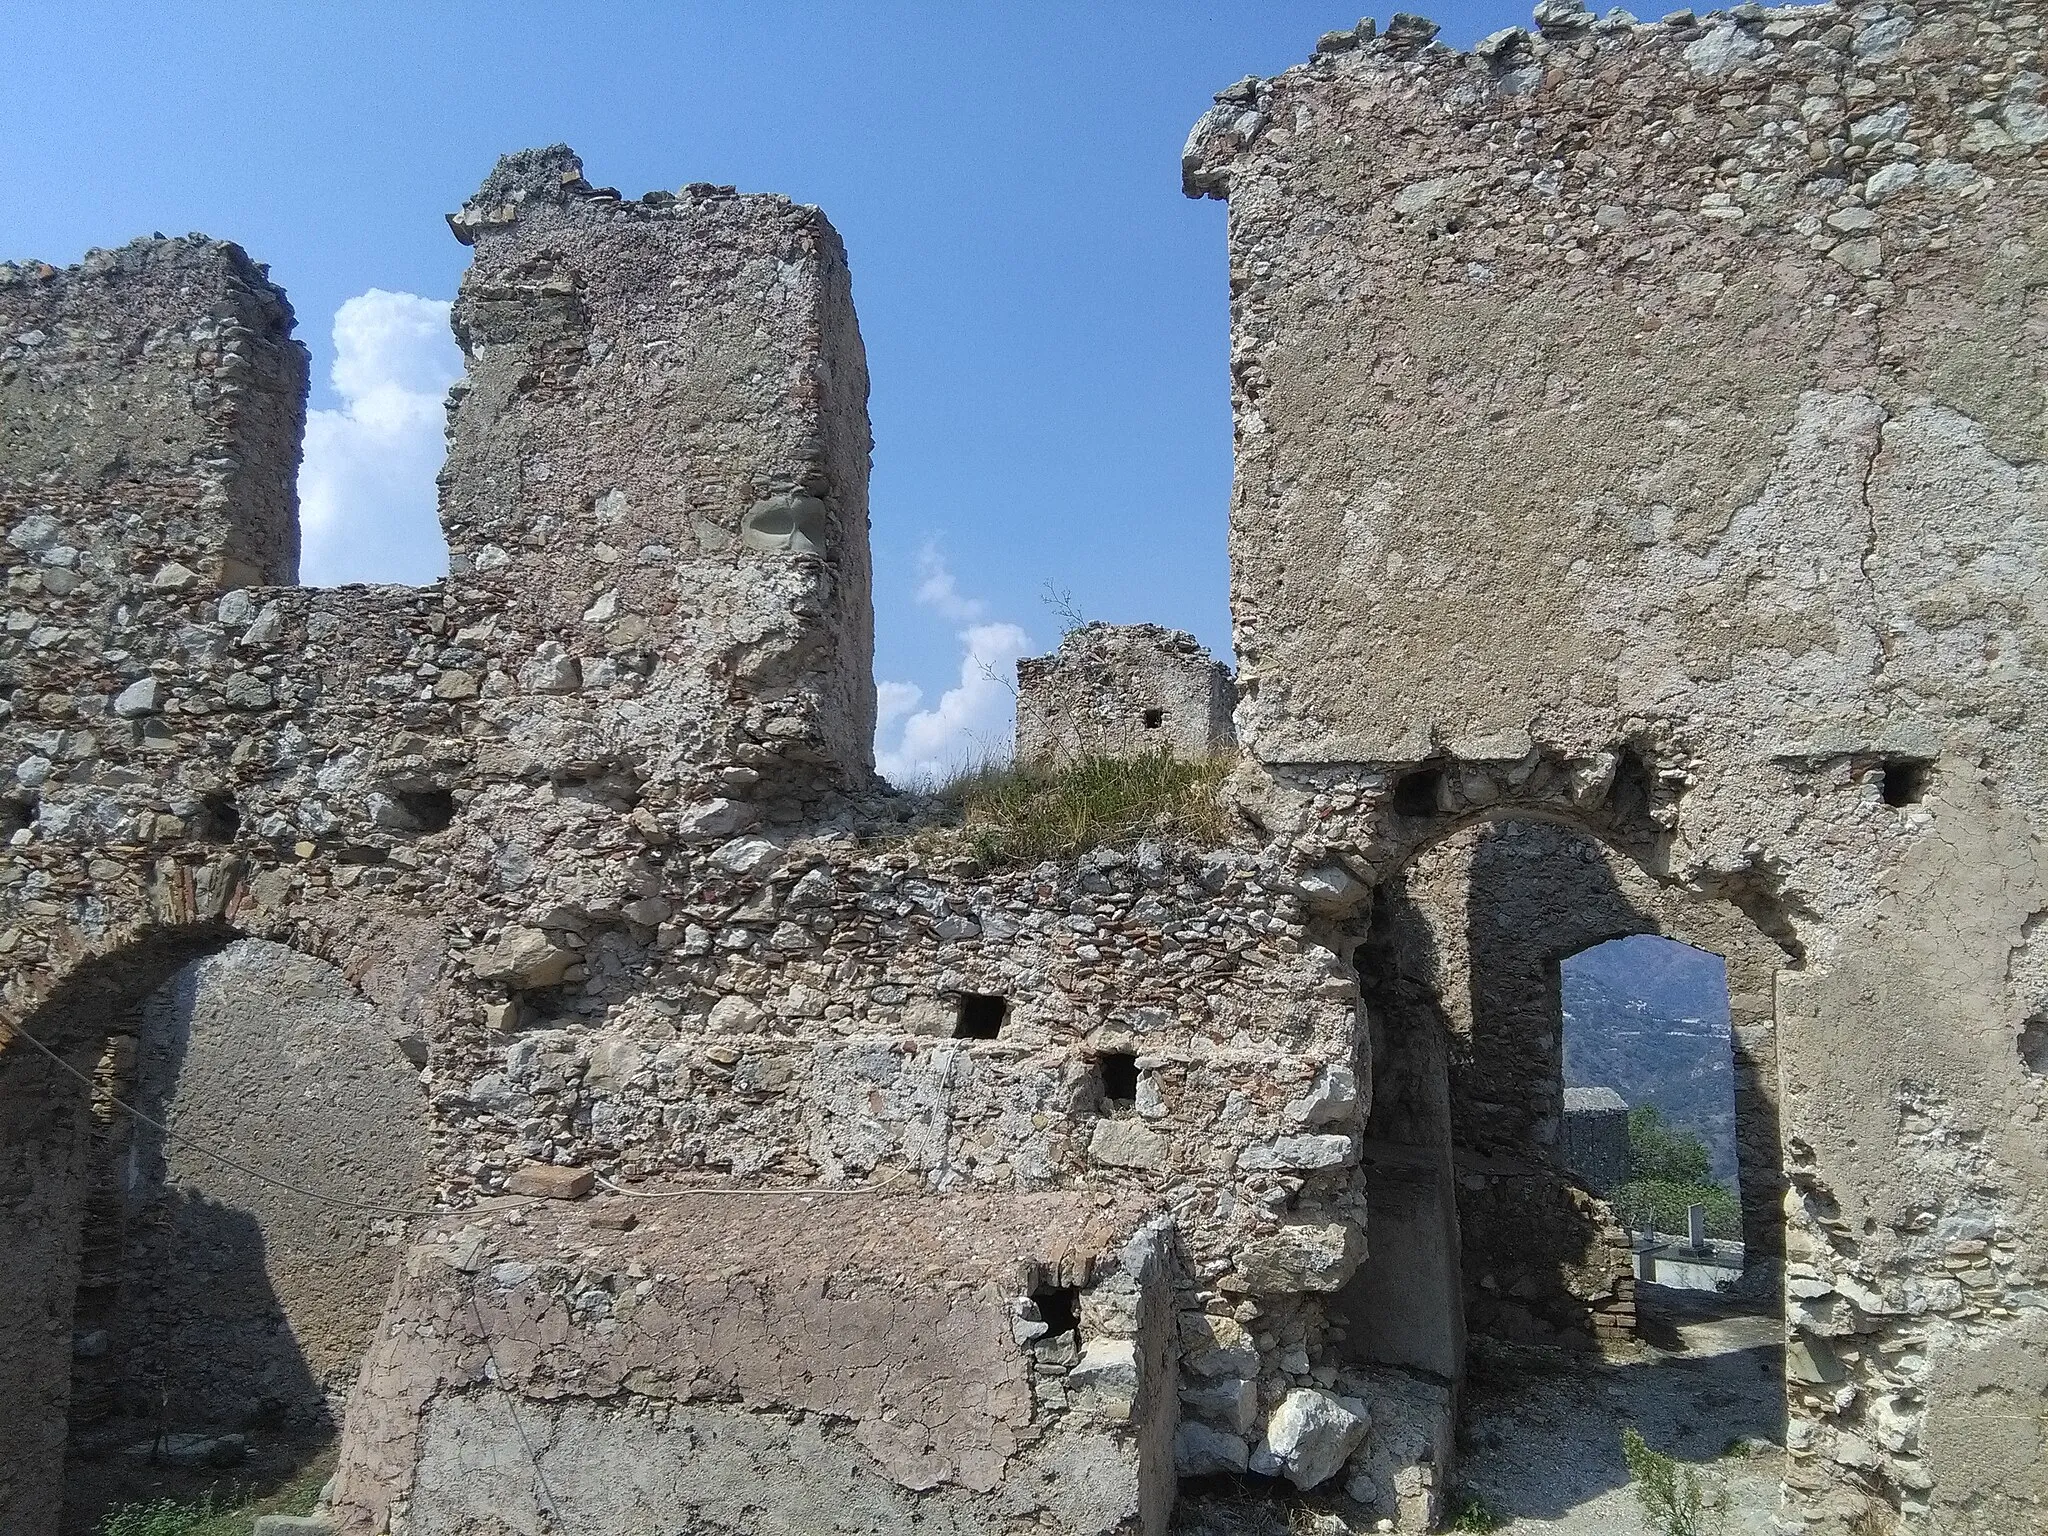 Photo showing: a section of the ruins of the Norman castle in Forza d'Agro. It was built by King Roger I of Sicily